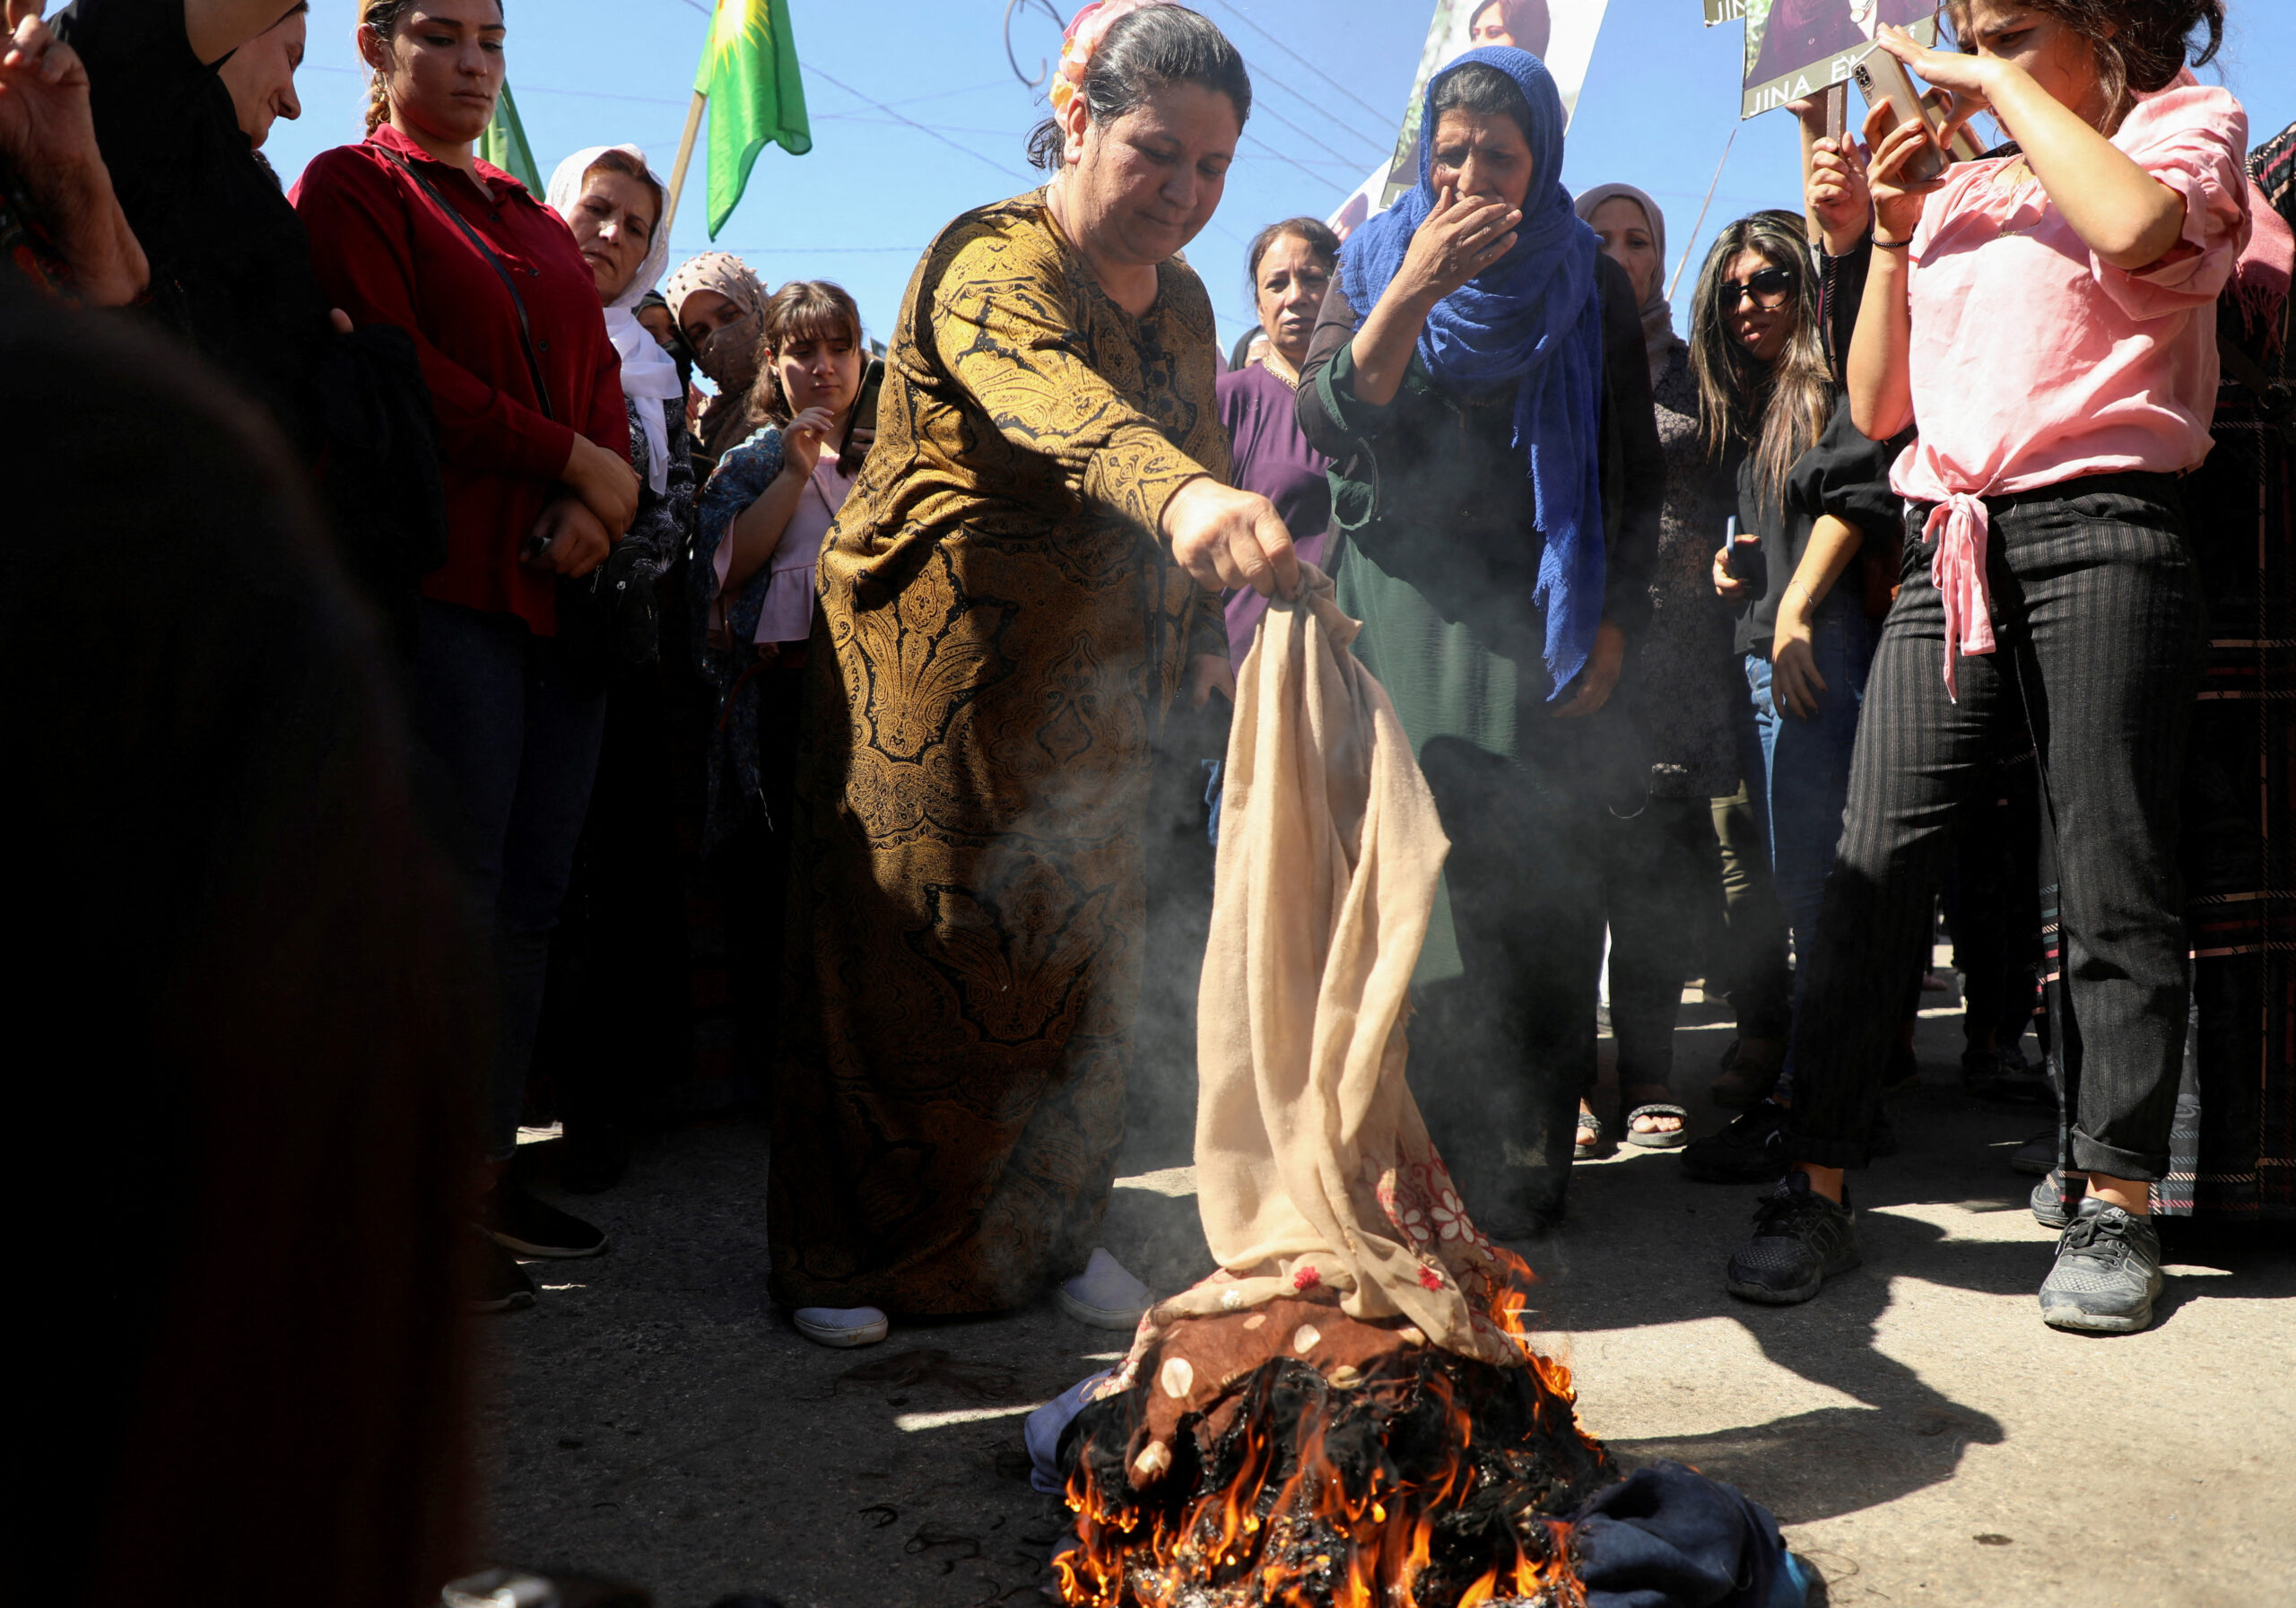 Women protest in Iran by burning the headscarves they are forced to wear